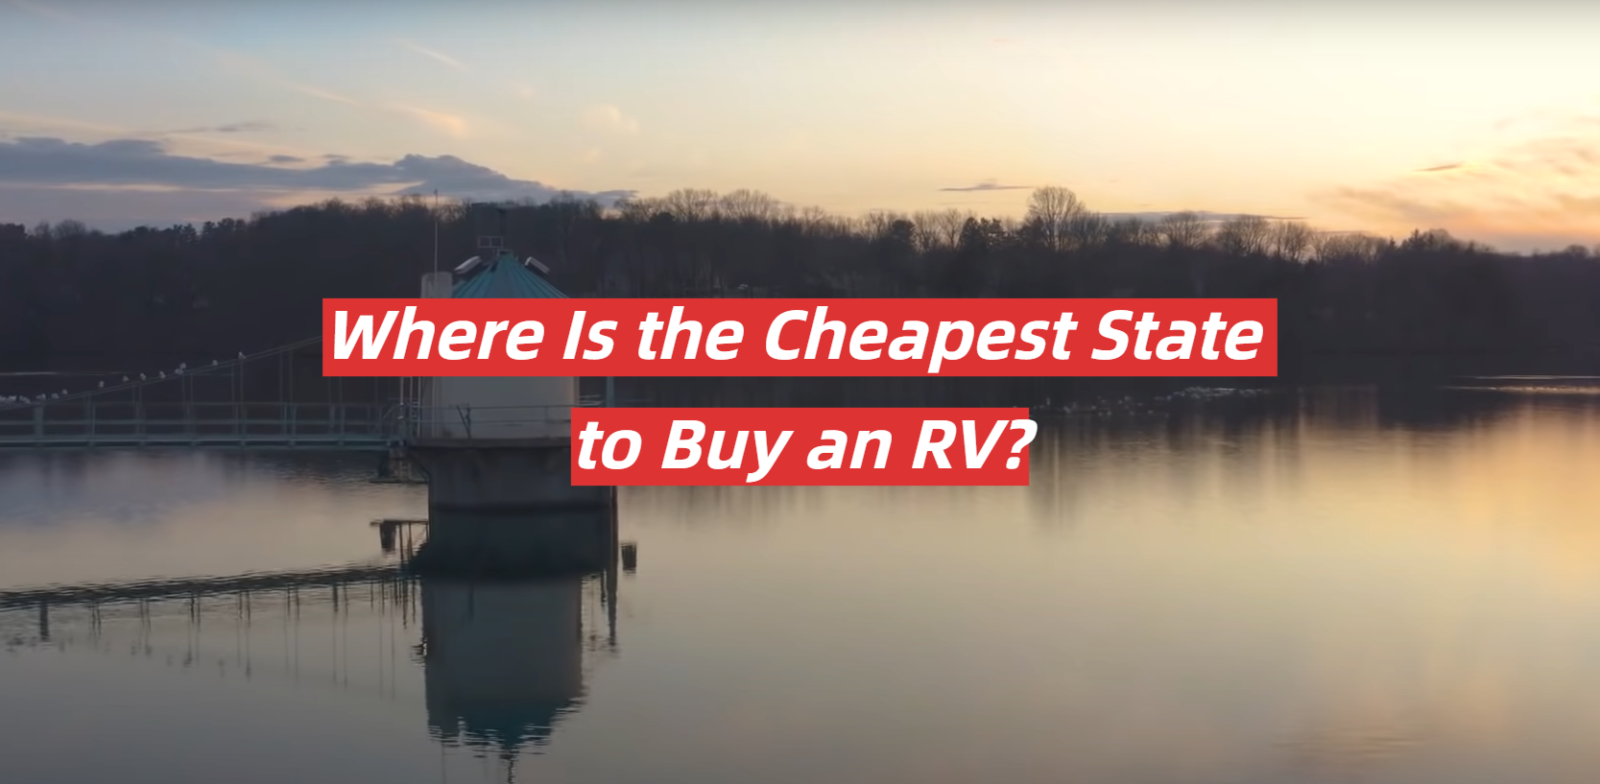 Where Is the Cheapest State to Buy an RV?